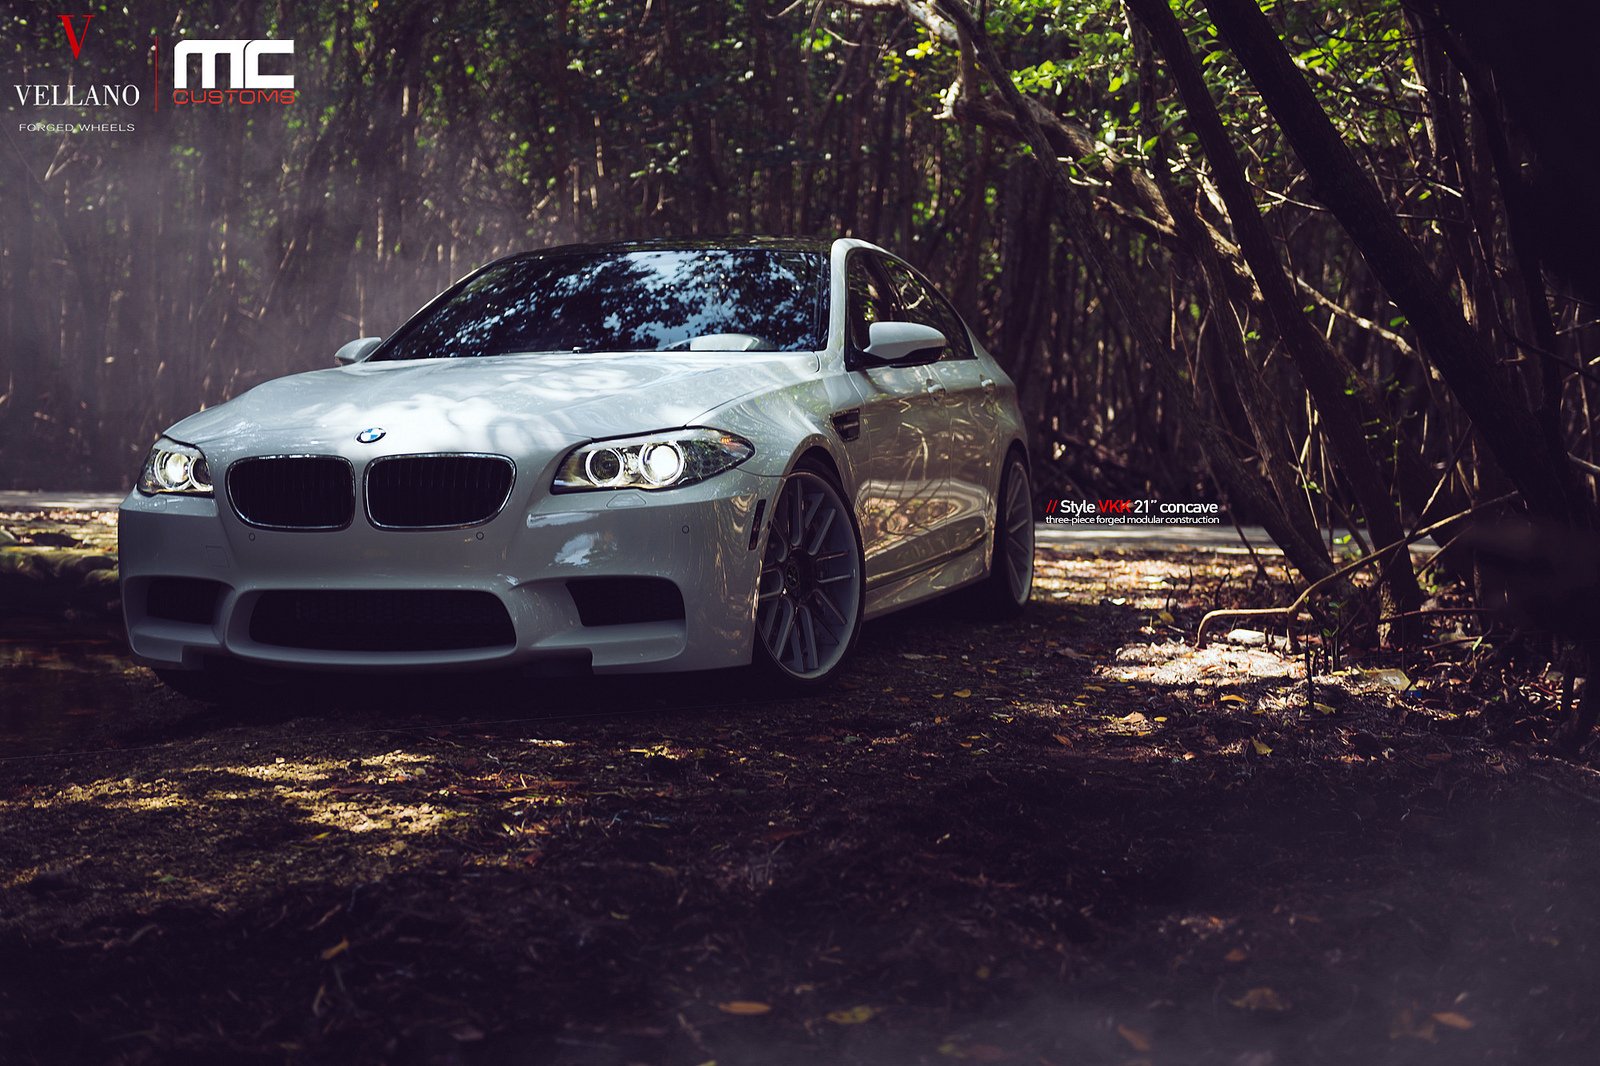 Gallery For Gt White Bmw M5 Wallpaper